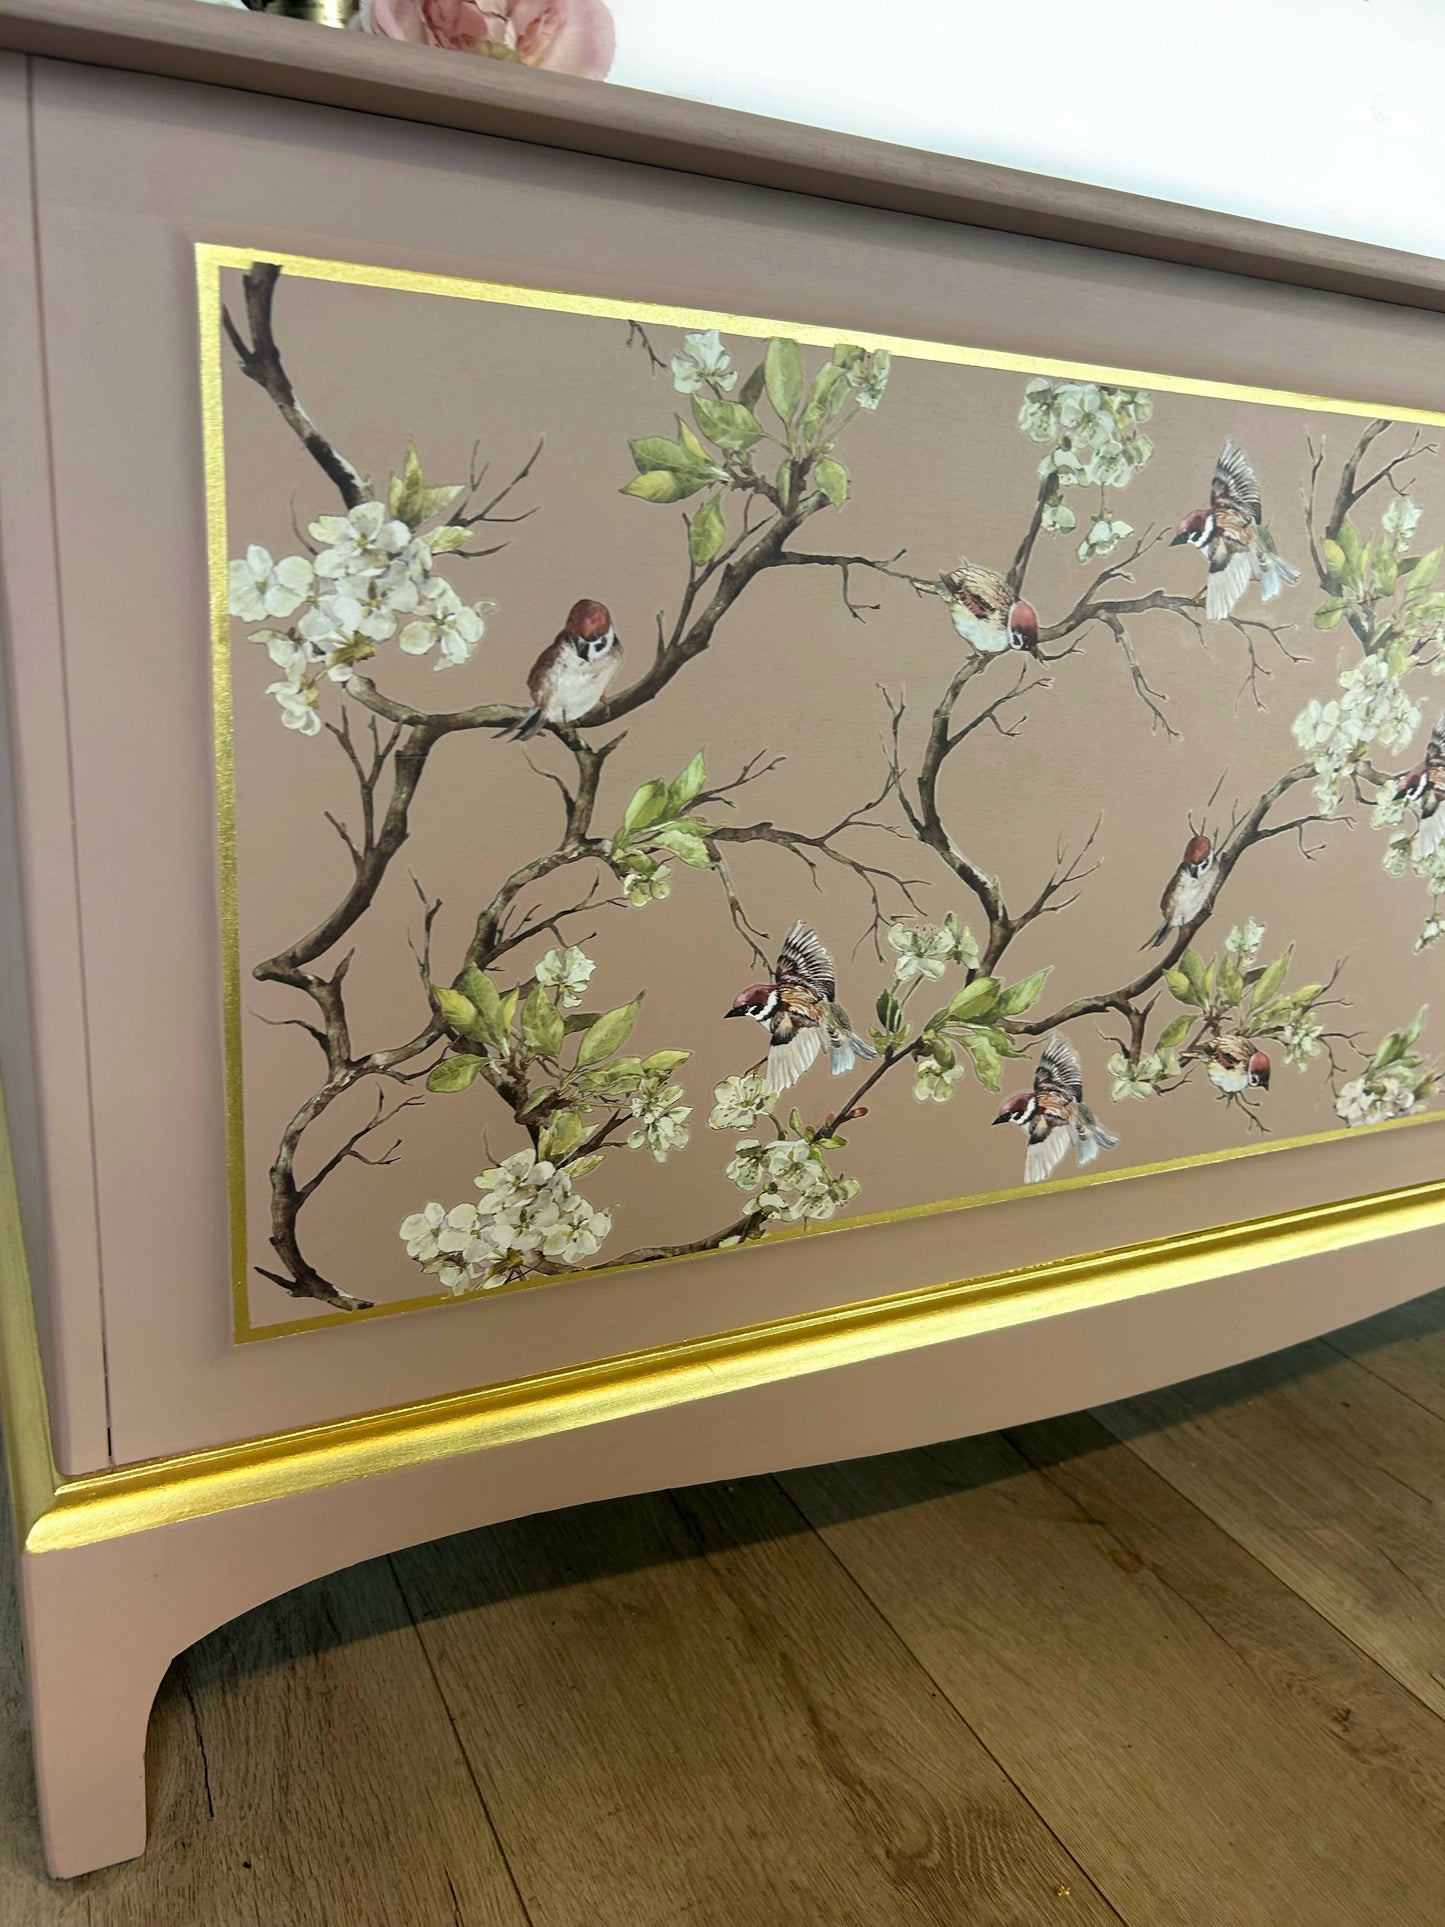 Pink and Gold Blossom Stag Blanket Box